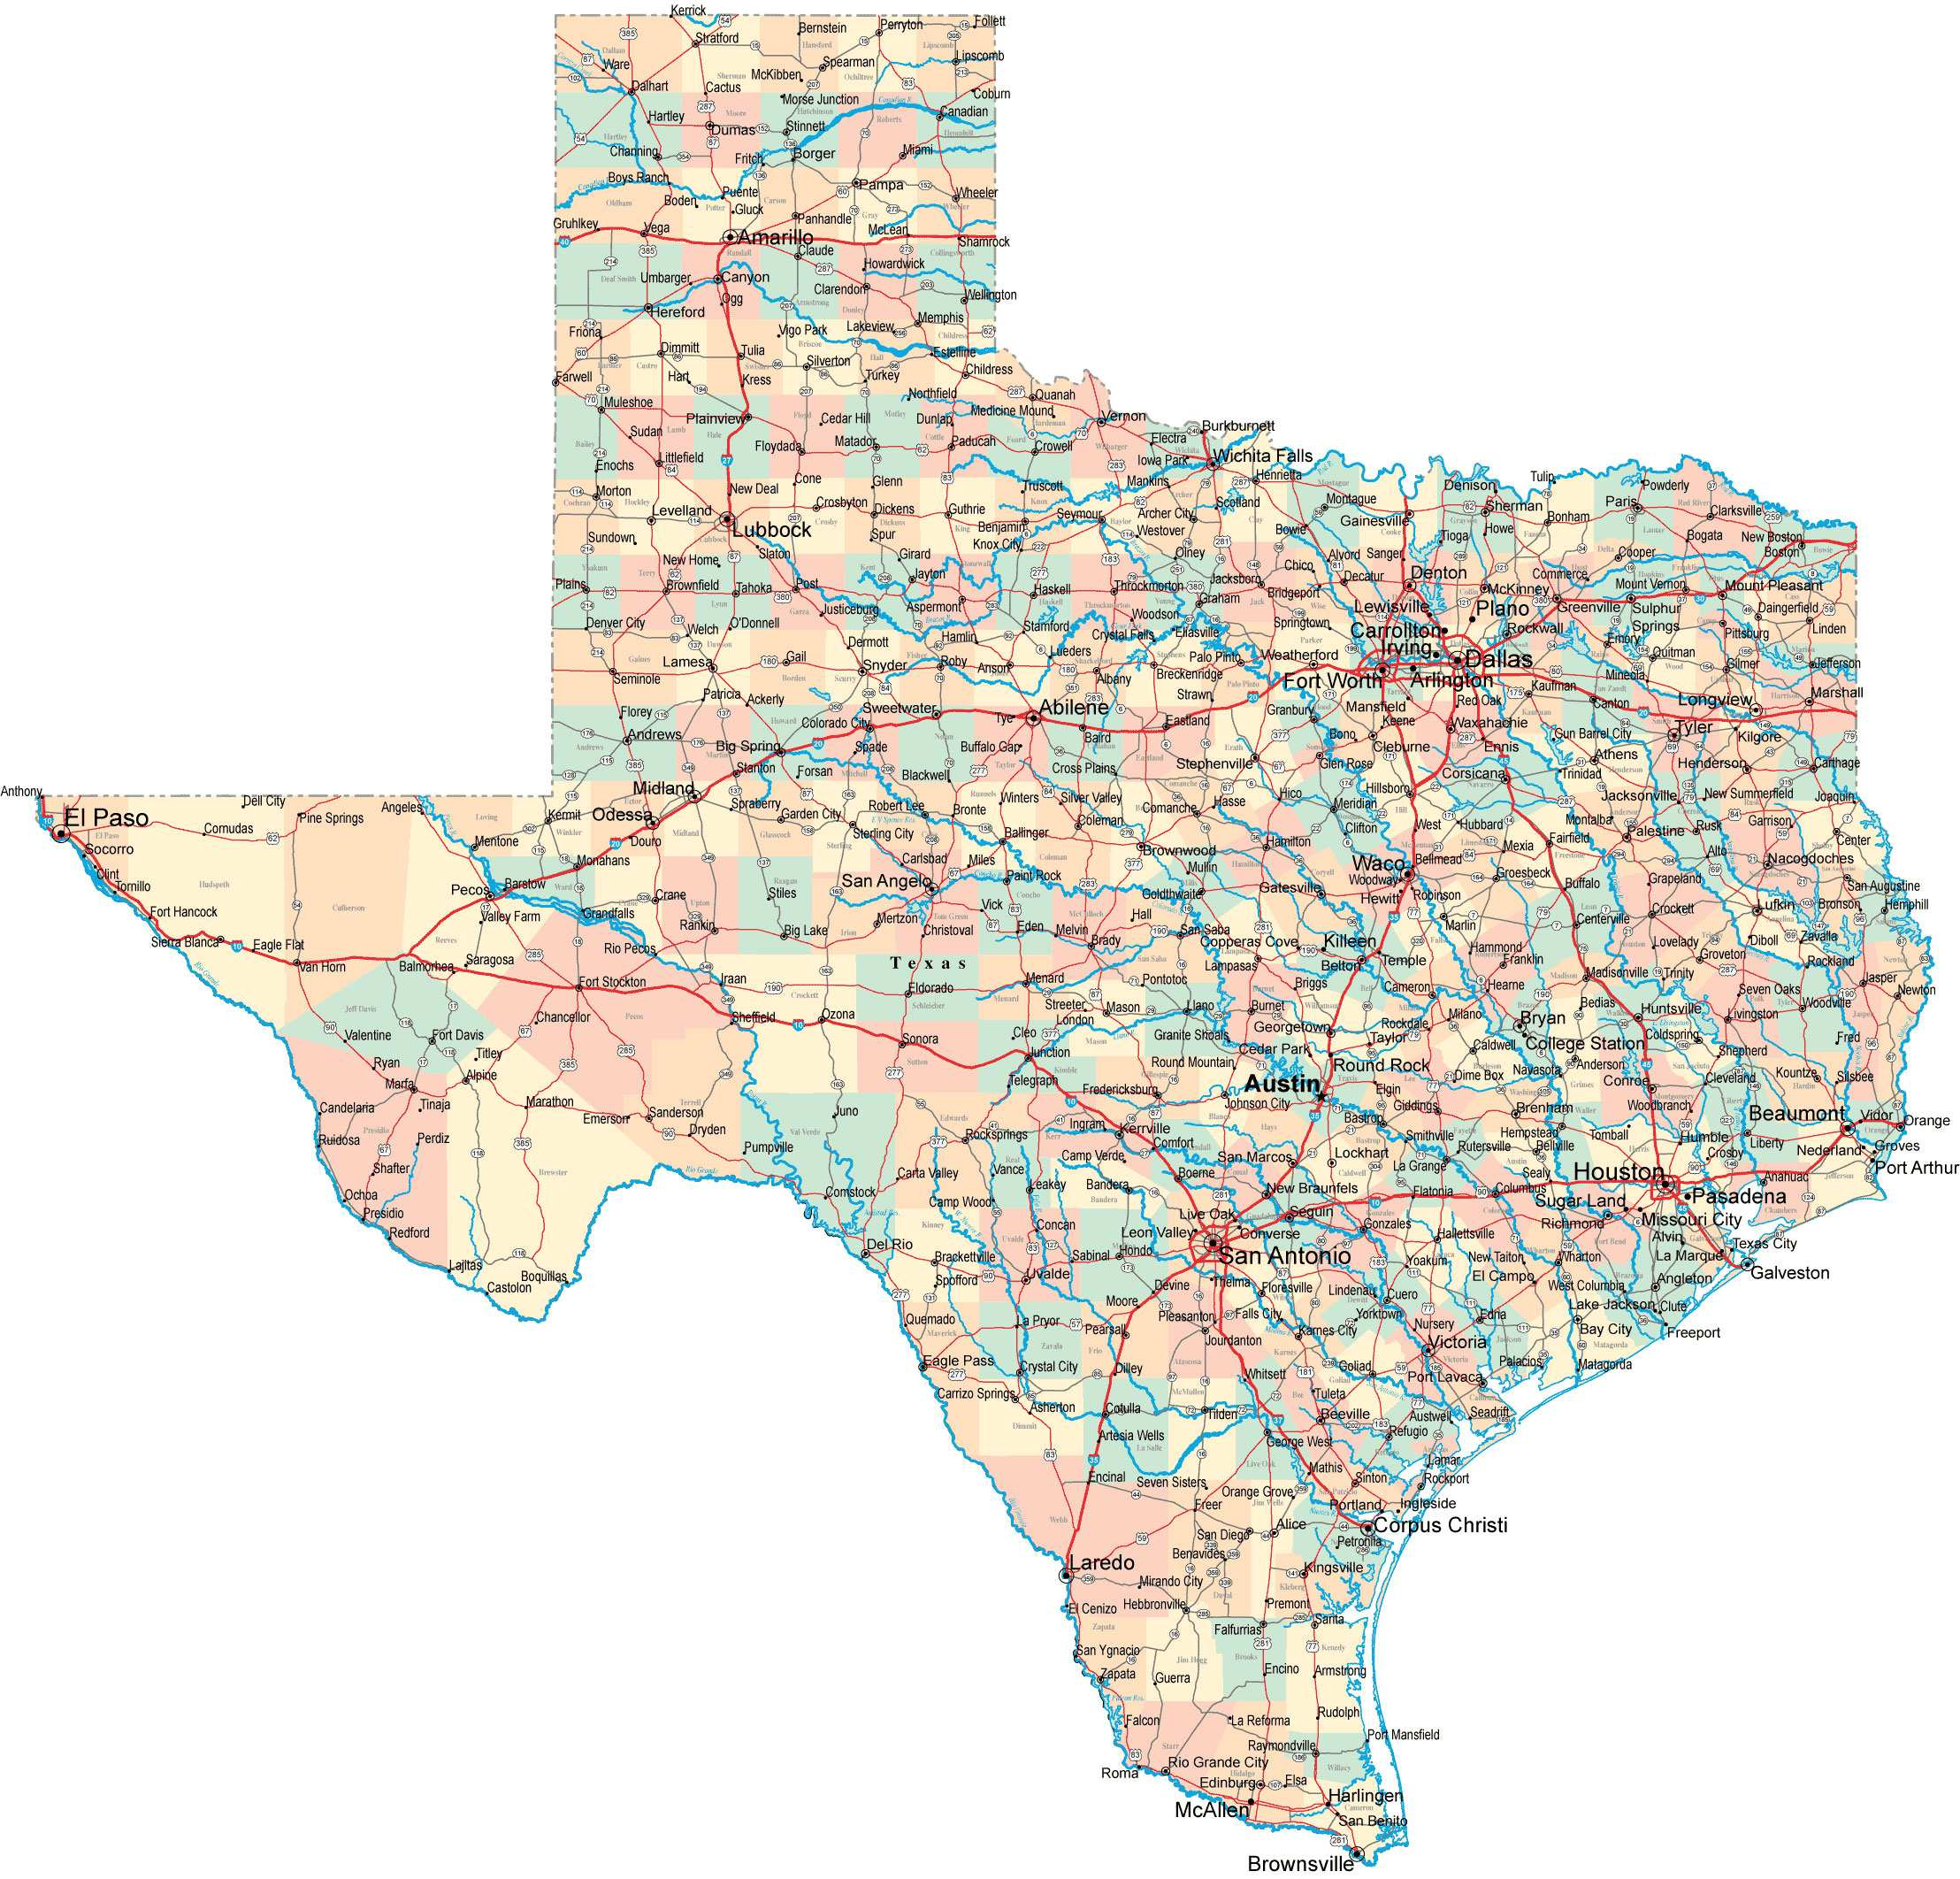 Large Texas Maps For Free Download And Print | High-Resolution And - State Map Of Texas Showing Cities